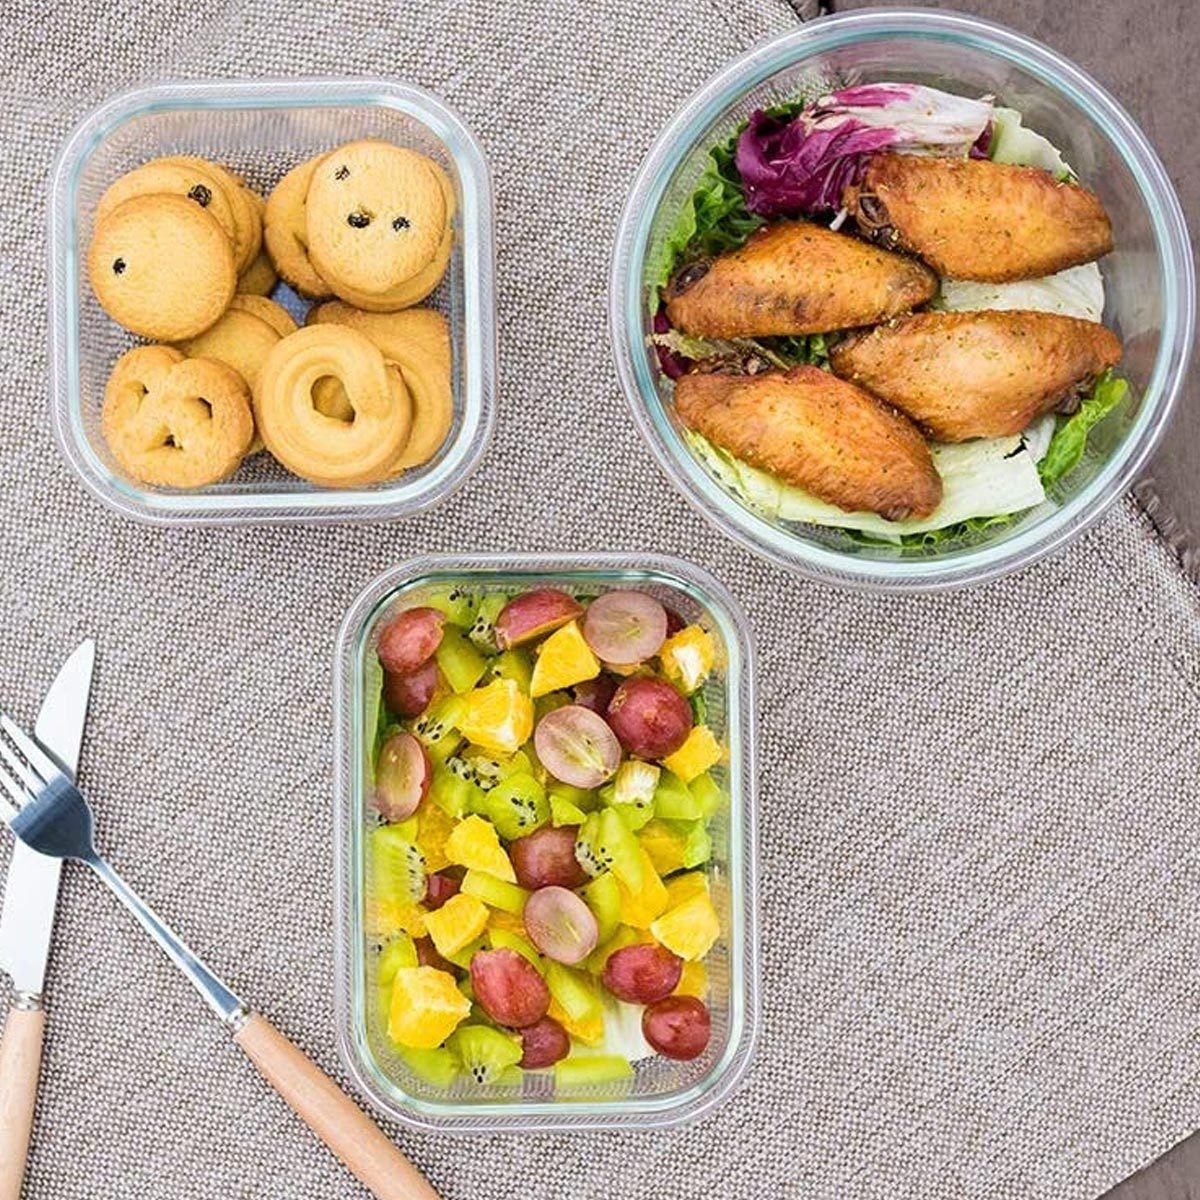 https://www.tasteofhome.com/wp-content/uploads/2021/04/BAYCO-Glass-Food-Storage-Containers-with-Lids-24-Piece-Glass-Meal-Prep-Containers-Airtight-Glass-Bento-Boxes-BPA-Free-Leak-Proof-12-lids-12-Containers-Blue_ecomm_via-amazon.com_.jpg?fit=700%2C700